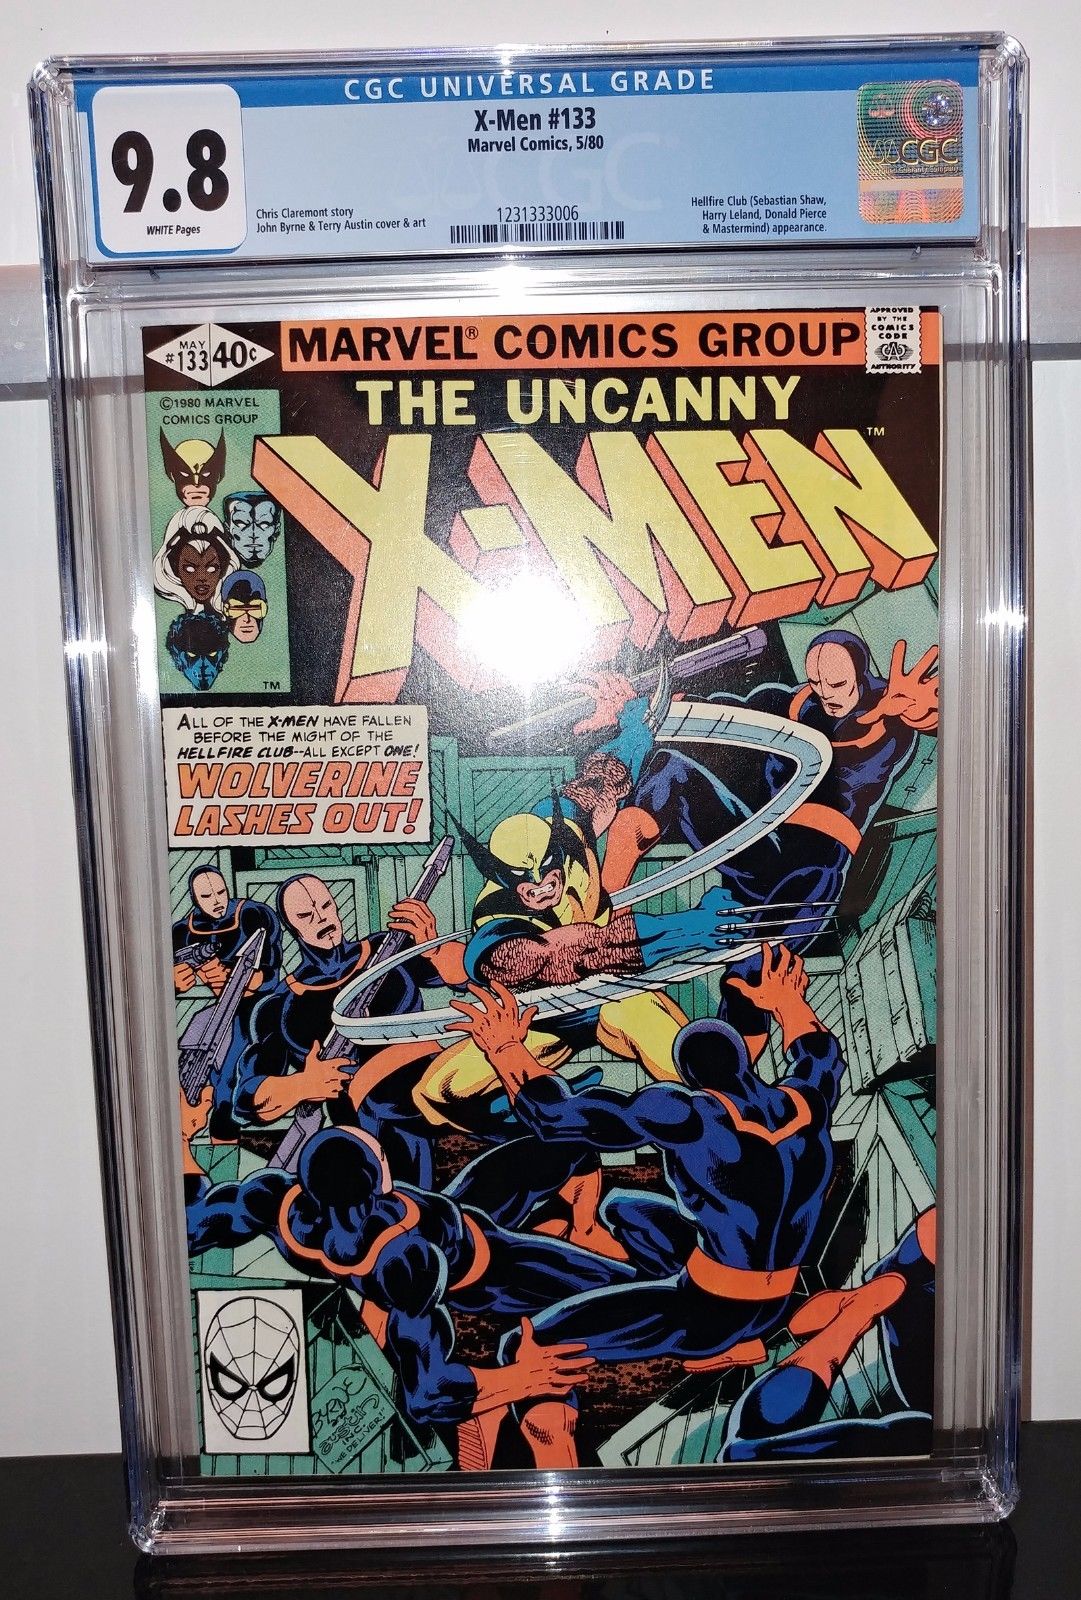 Uncanny X-Men #132 & #133 - All CGC 9.8 White Pages - Hellfire Club